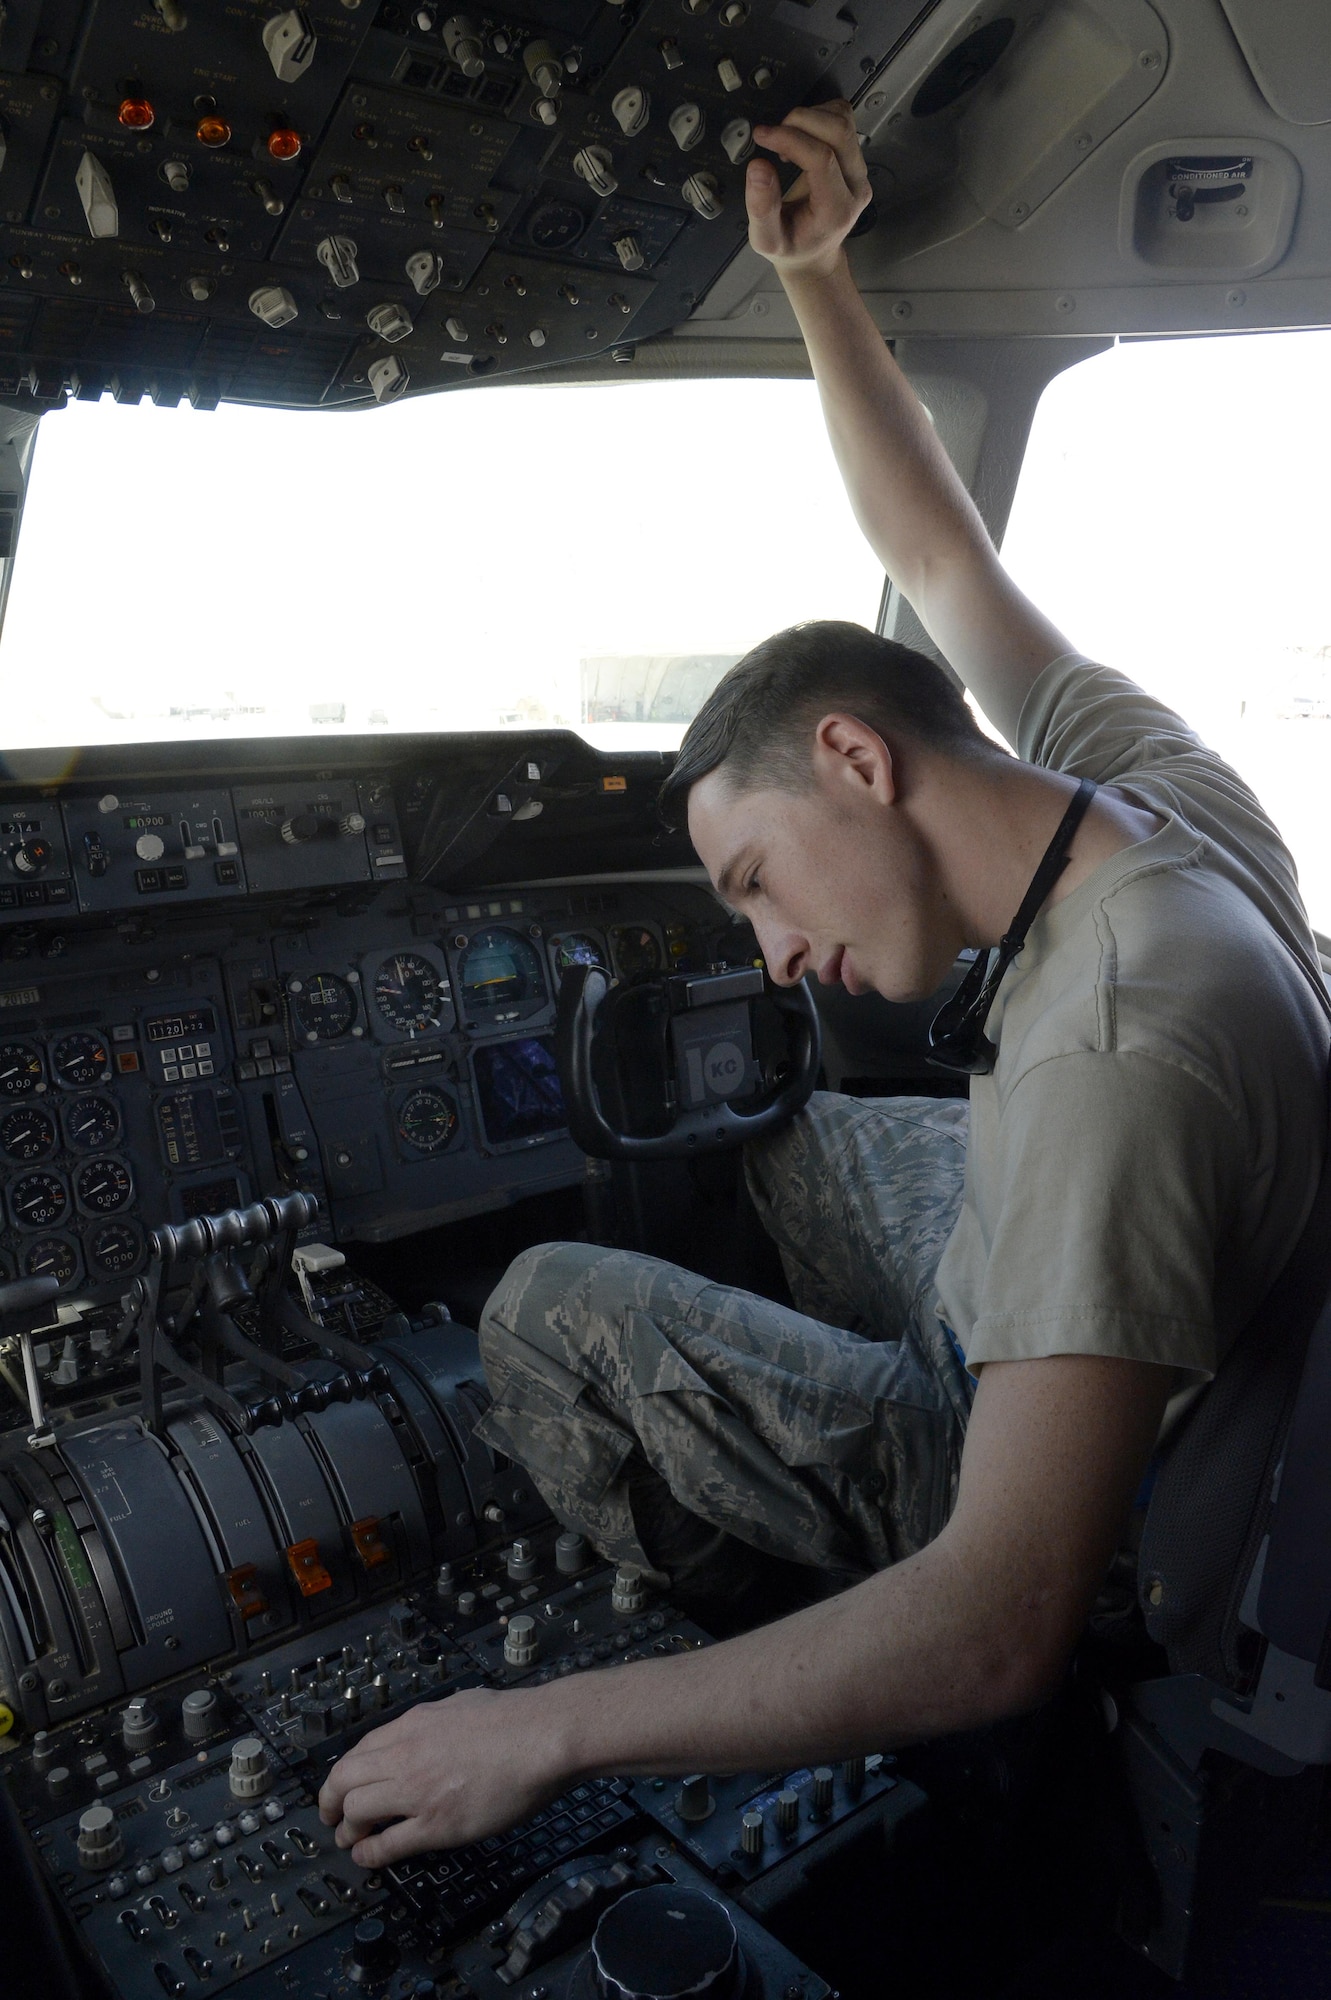 Senior Airman Will, KC-10 Extender instrument and flight control systems technician, performs a preflight inspection on a KC-10 Extender at an undisclosed location in Southwest Asia Feb. 2, 2015. Specialists respond to ‘red balls’, which are malfunctions that occur before flight, as well as delayed discrepancies. Will is deployed from Travis AFB, Calif., and is a native of Glendale, Ariz. (U.S. Air Force photo/Tech. Sgt. Marie Brown)